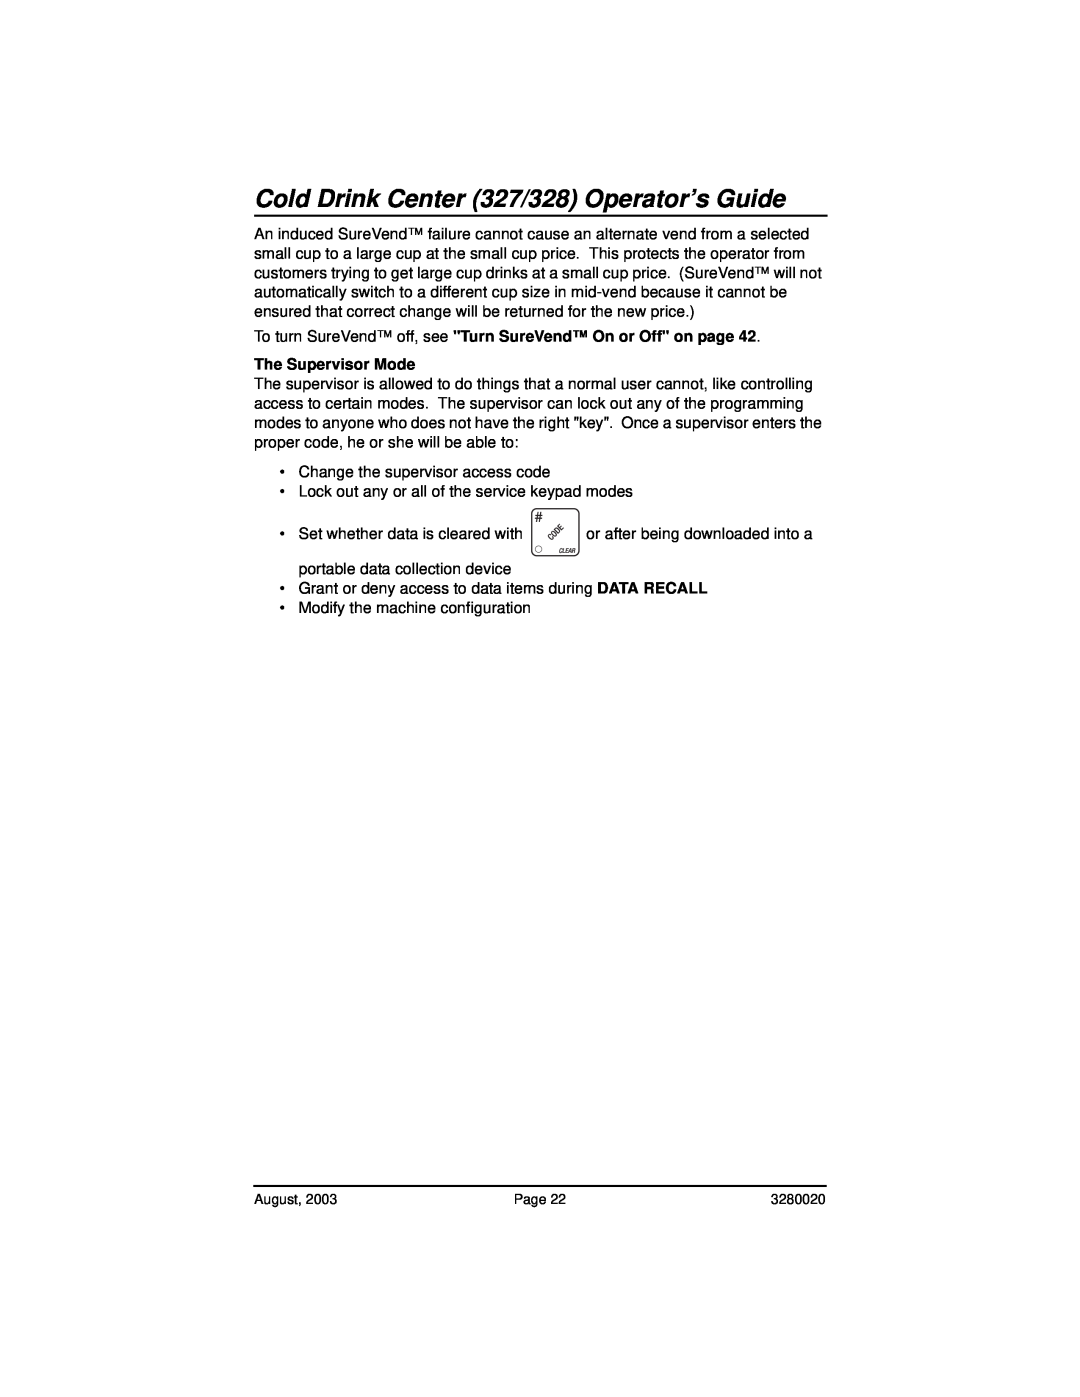 Everpure 325 manual Cold Drink Center 327/328 Operator’s Guide, The Supervisor Mode 